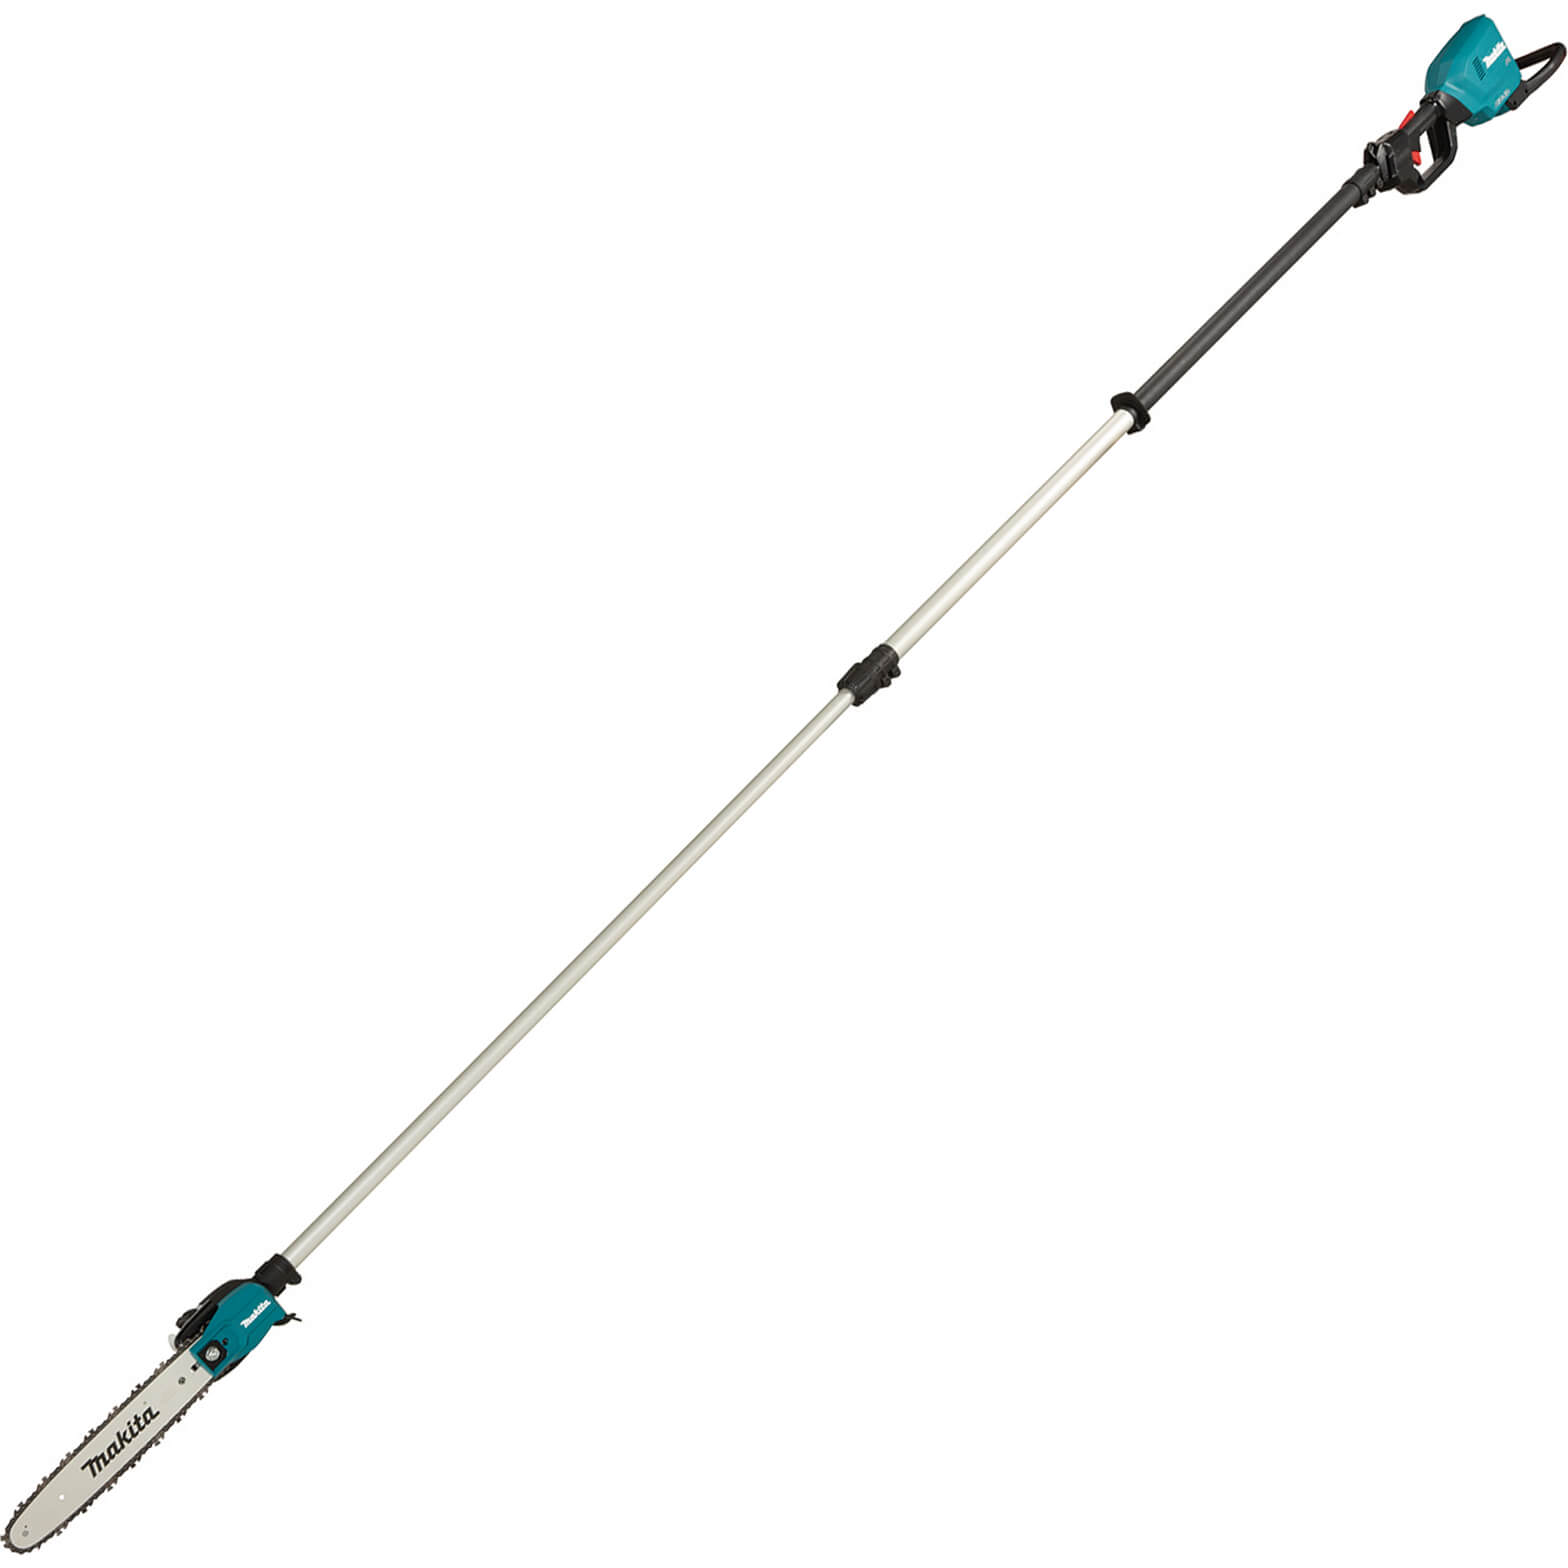 Image of Makita DUA301 Twin 18v LXT Cordless Brushless Telescopic Pole Saw No Batteries No Charger